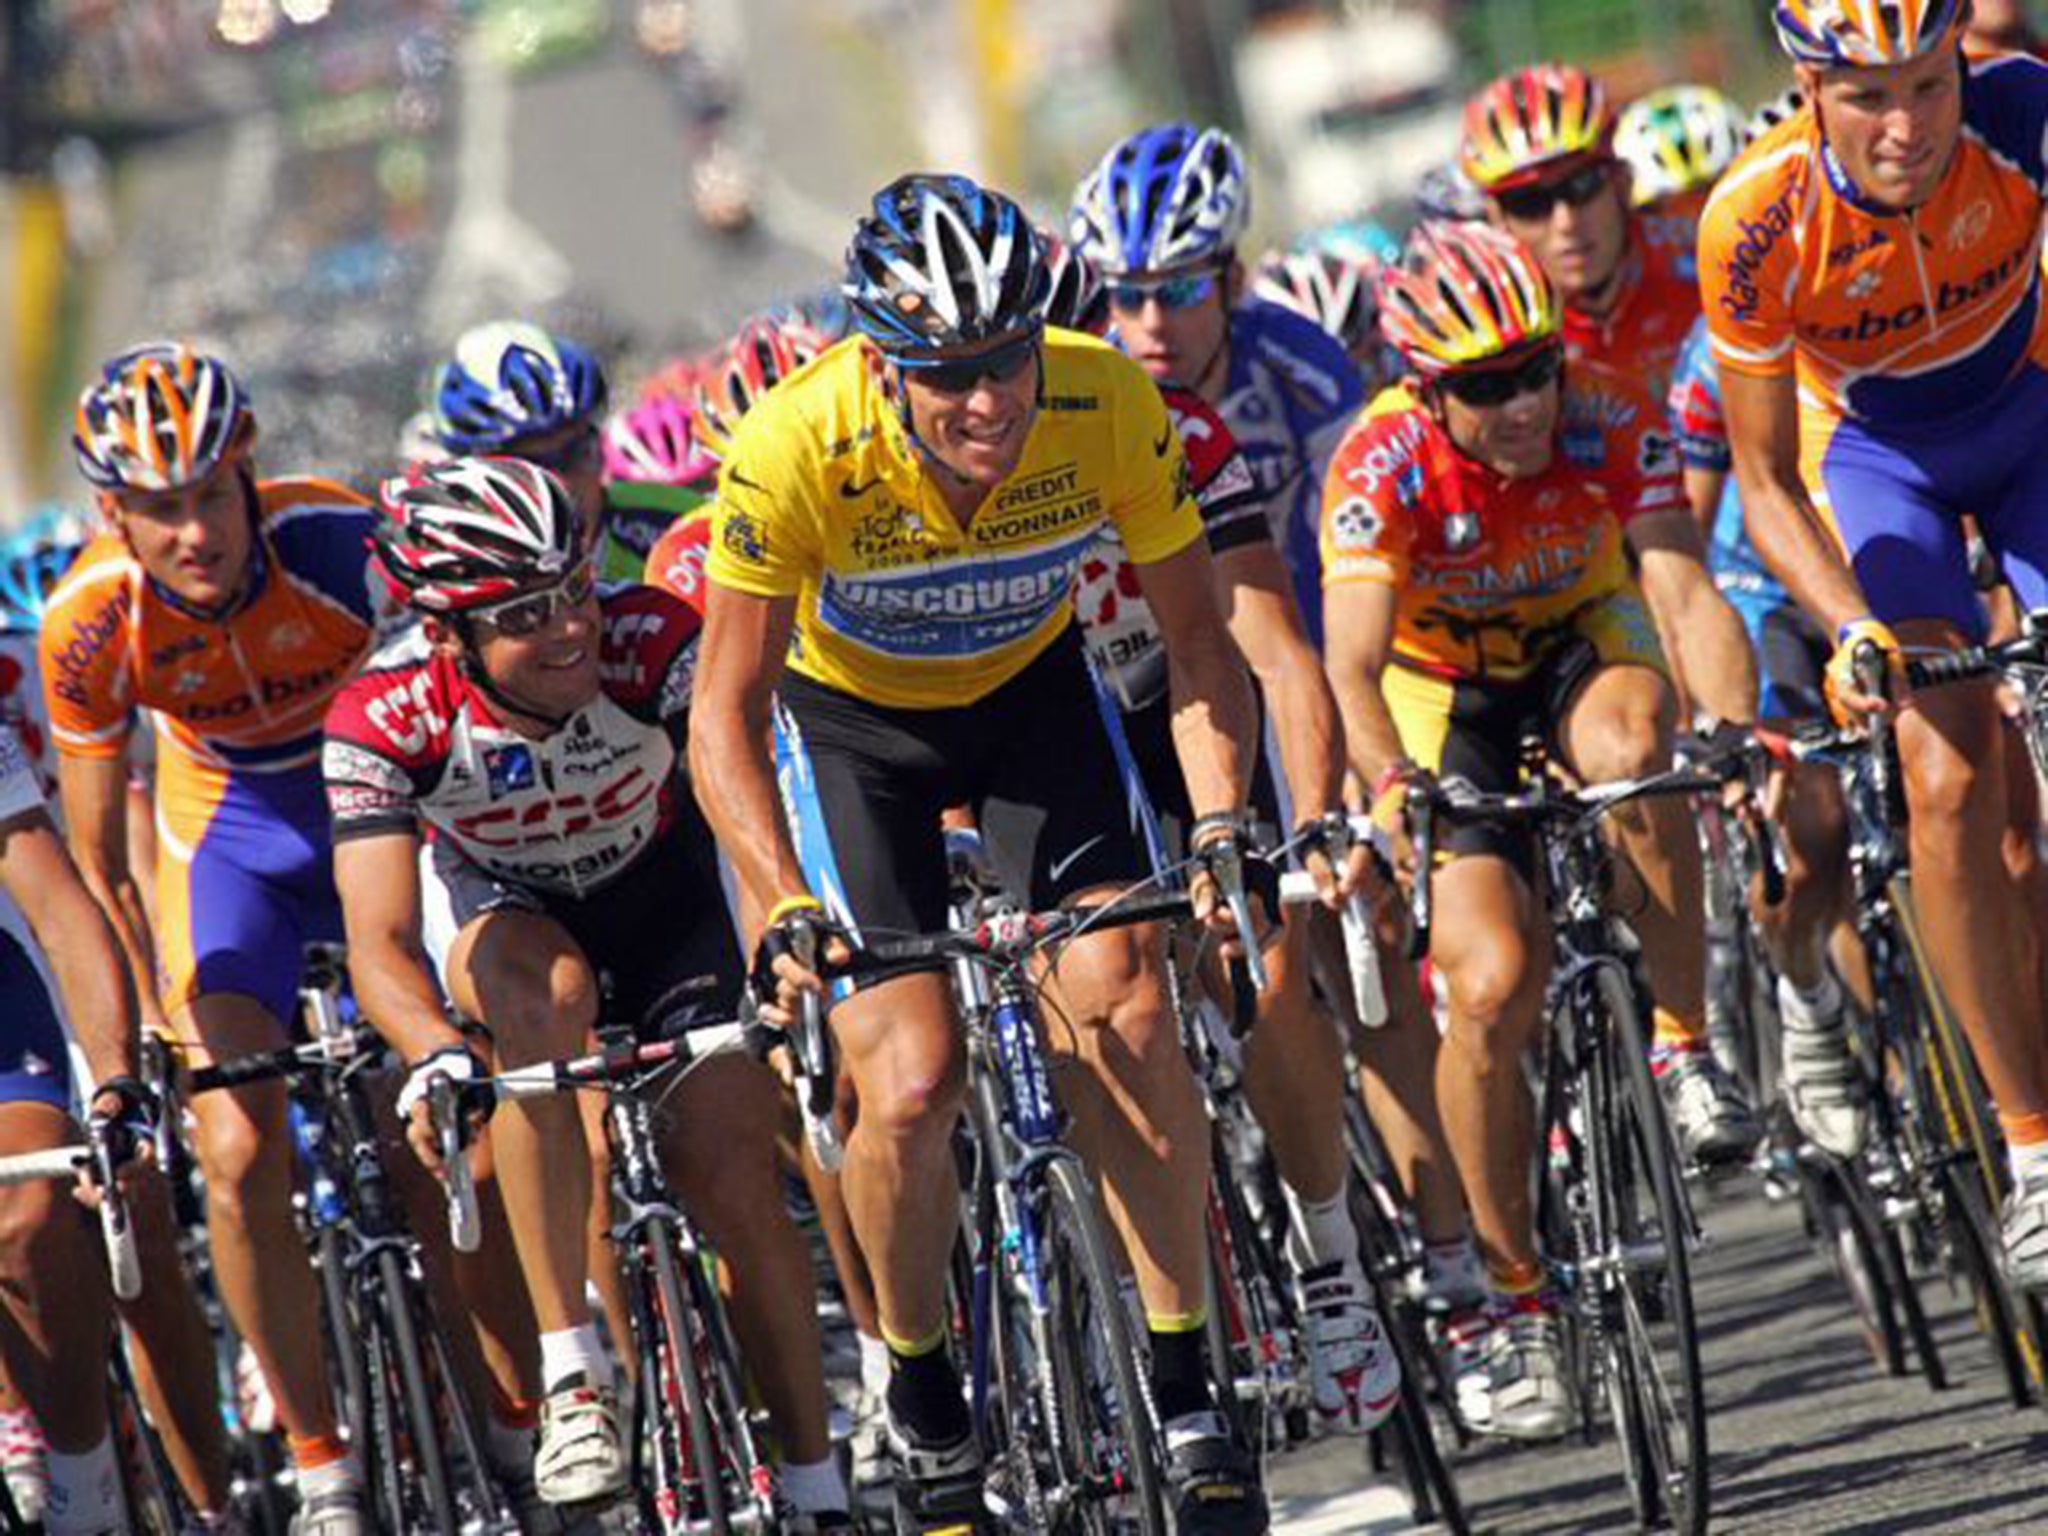 Armstrong was stripped of all seven Tour de France titles